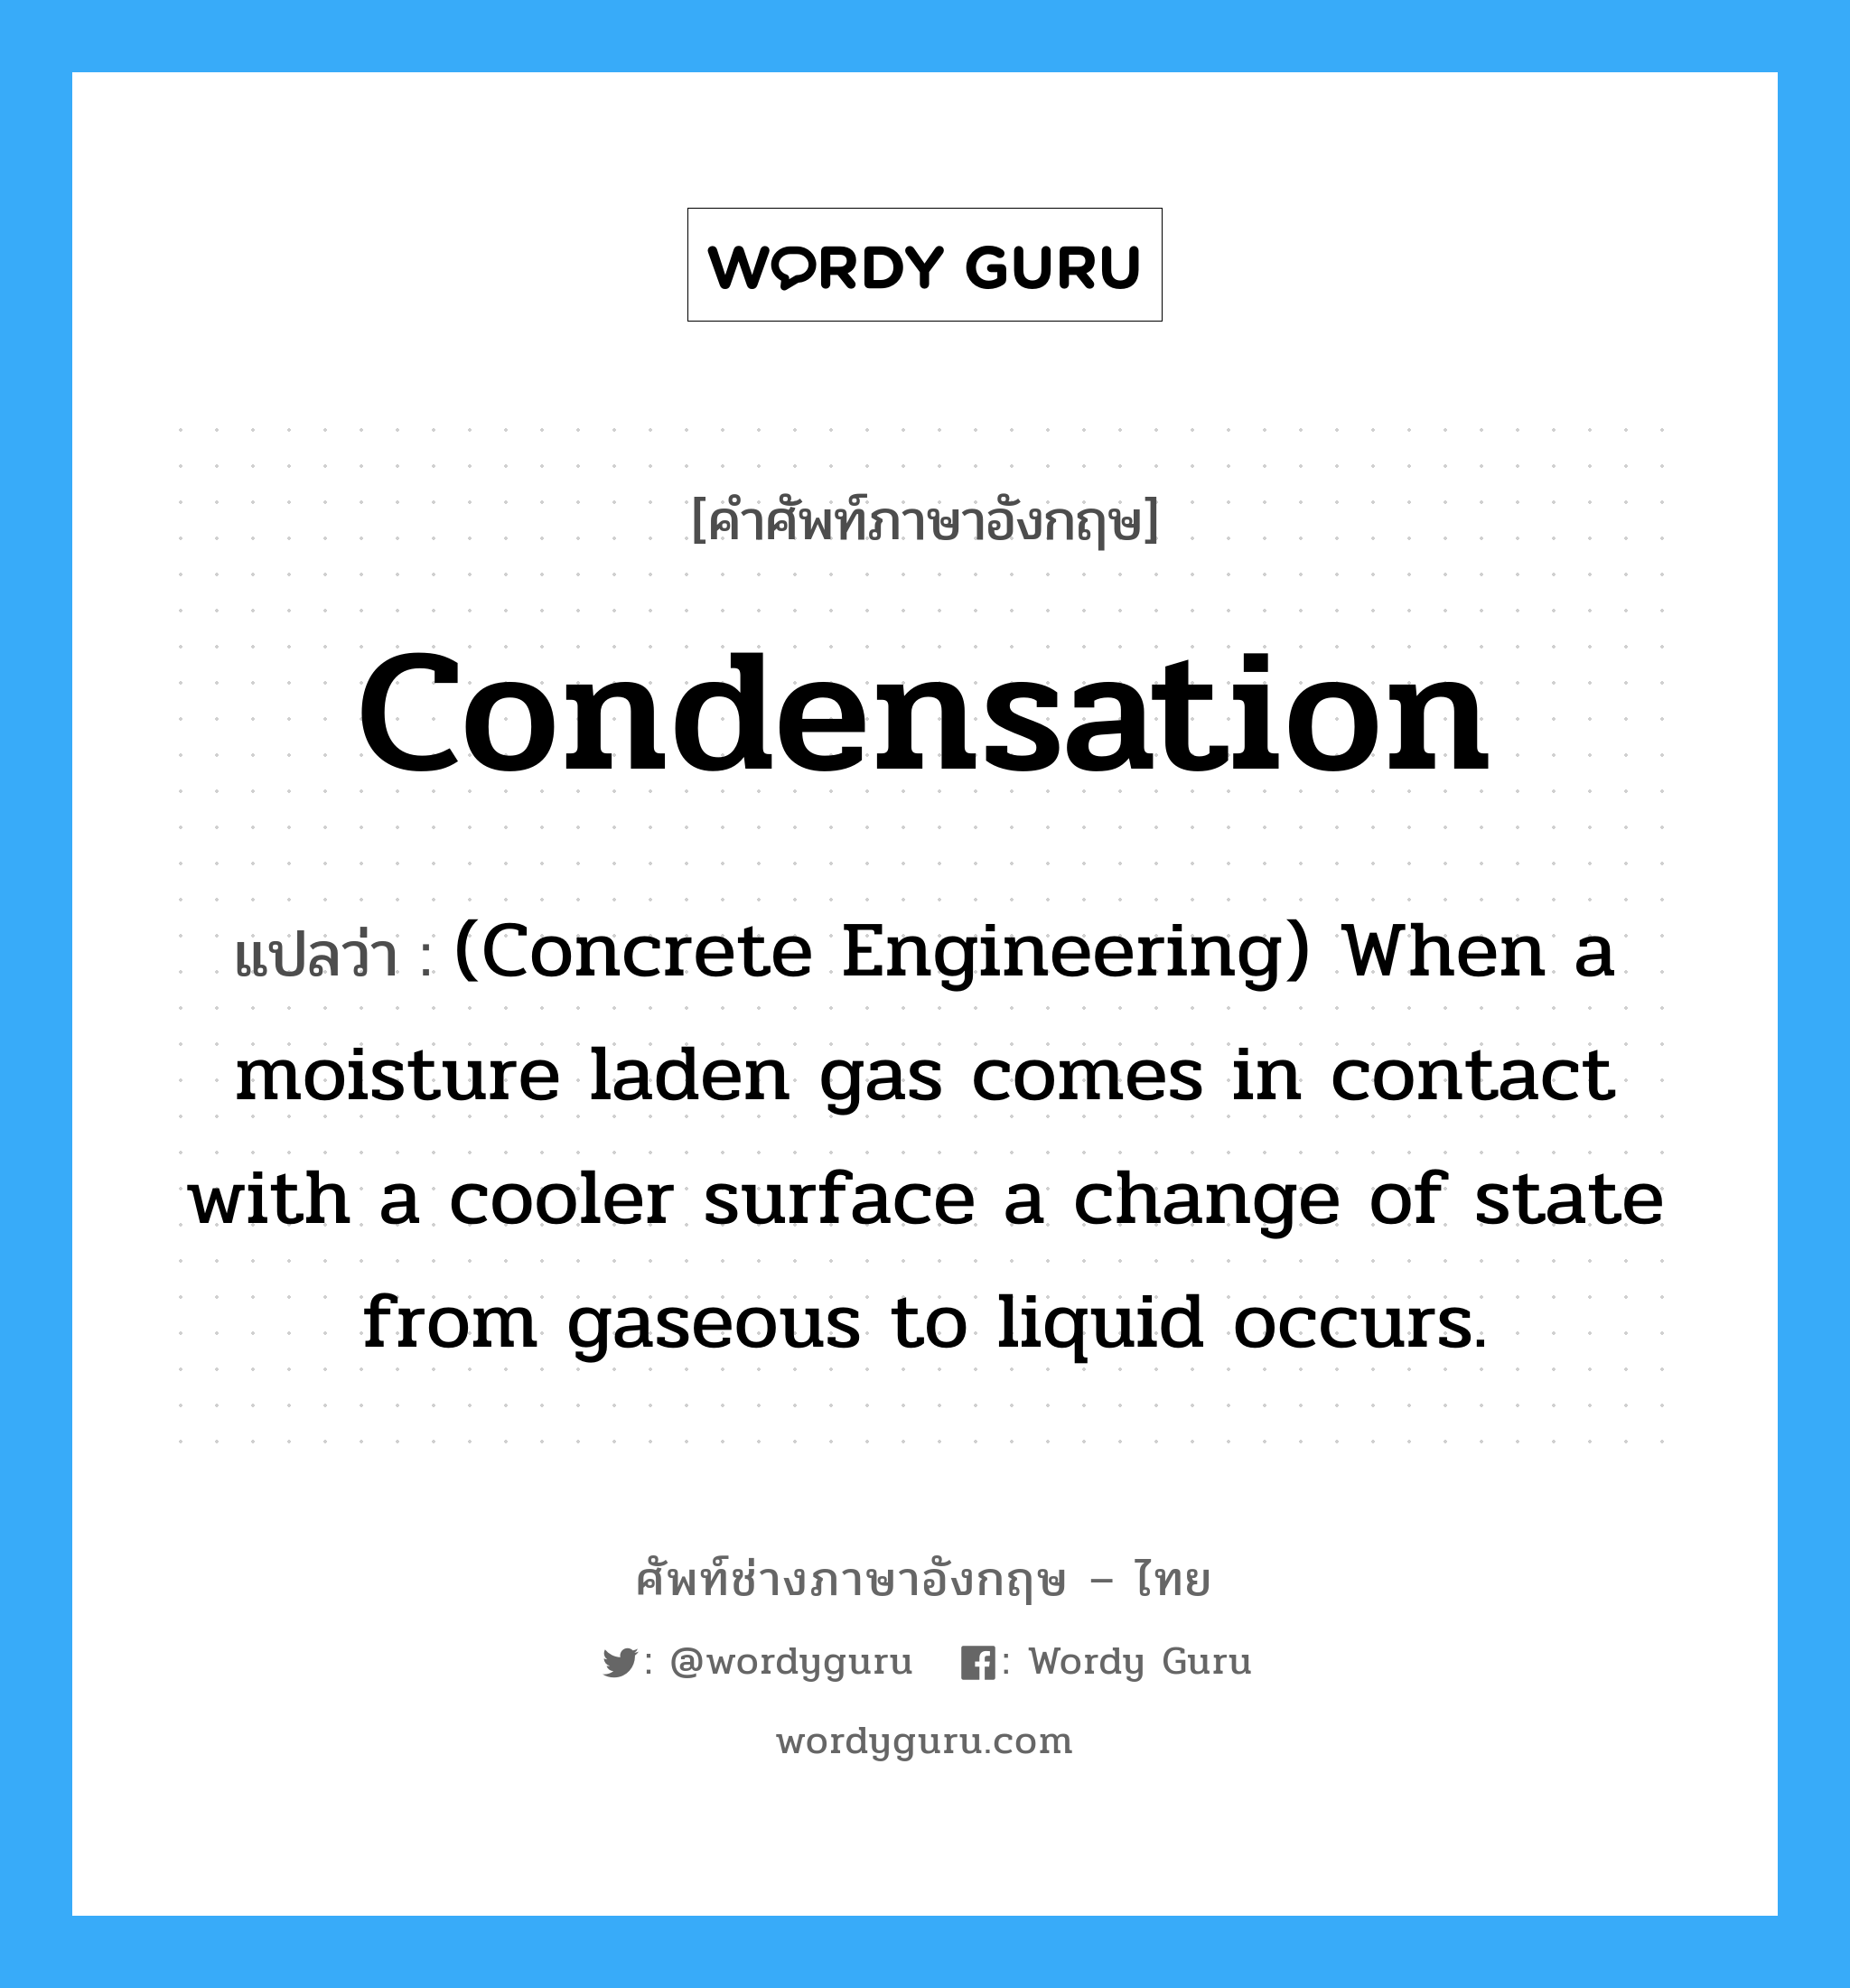 Condensation แปลว่า?, คำศัพท์ช่างภาษาอังกฤษ - ไทย Condensation คำศัพท์ภาษาอังกฤษ Condensation แปลว่า (Concrete Engineering) When a moisture laden gas comes in contact with a cooler surface a change of state from gaseous to liquid occurs.